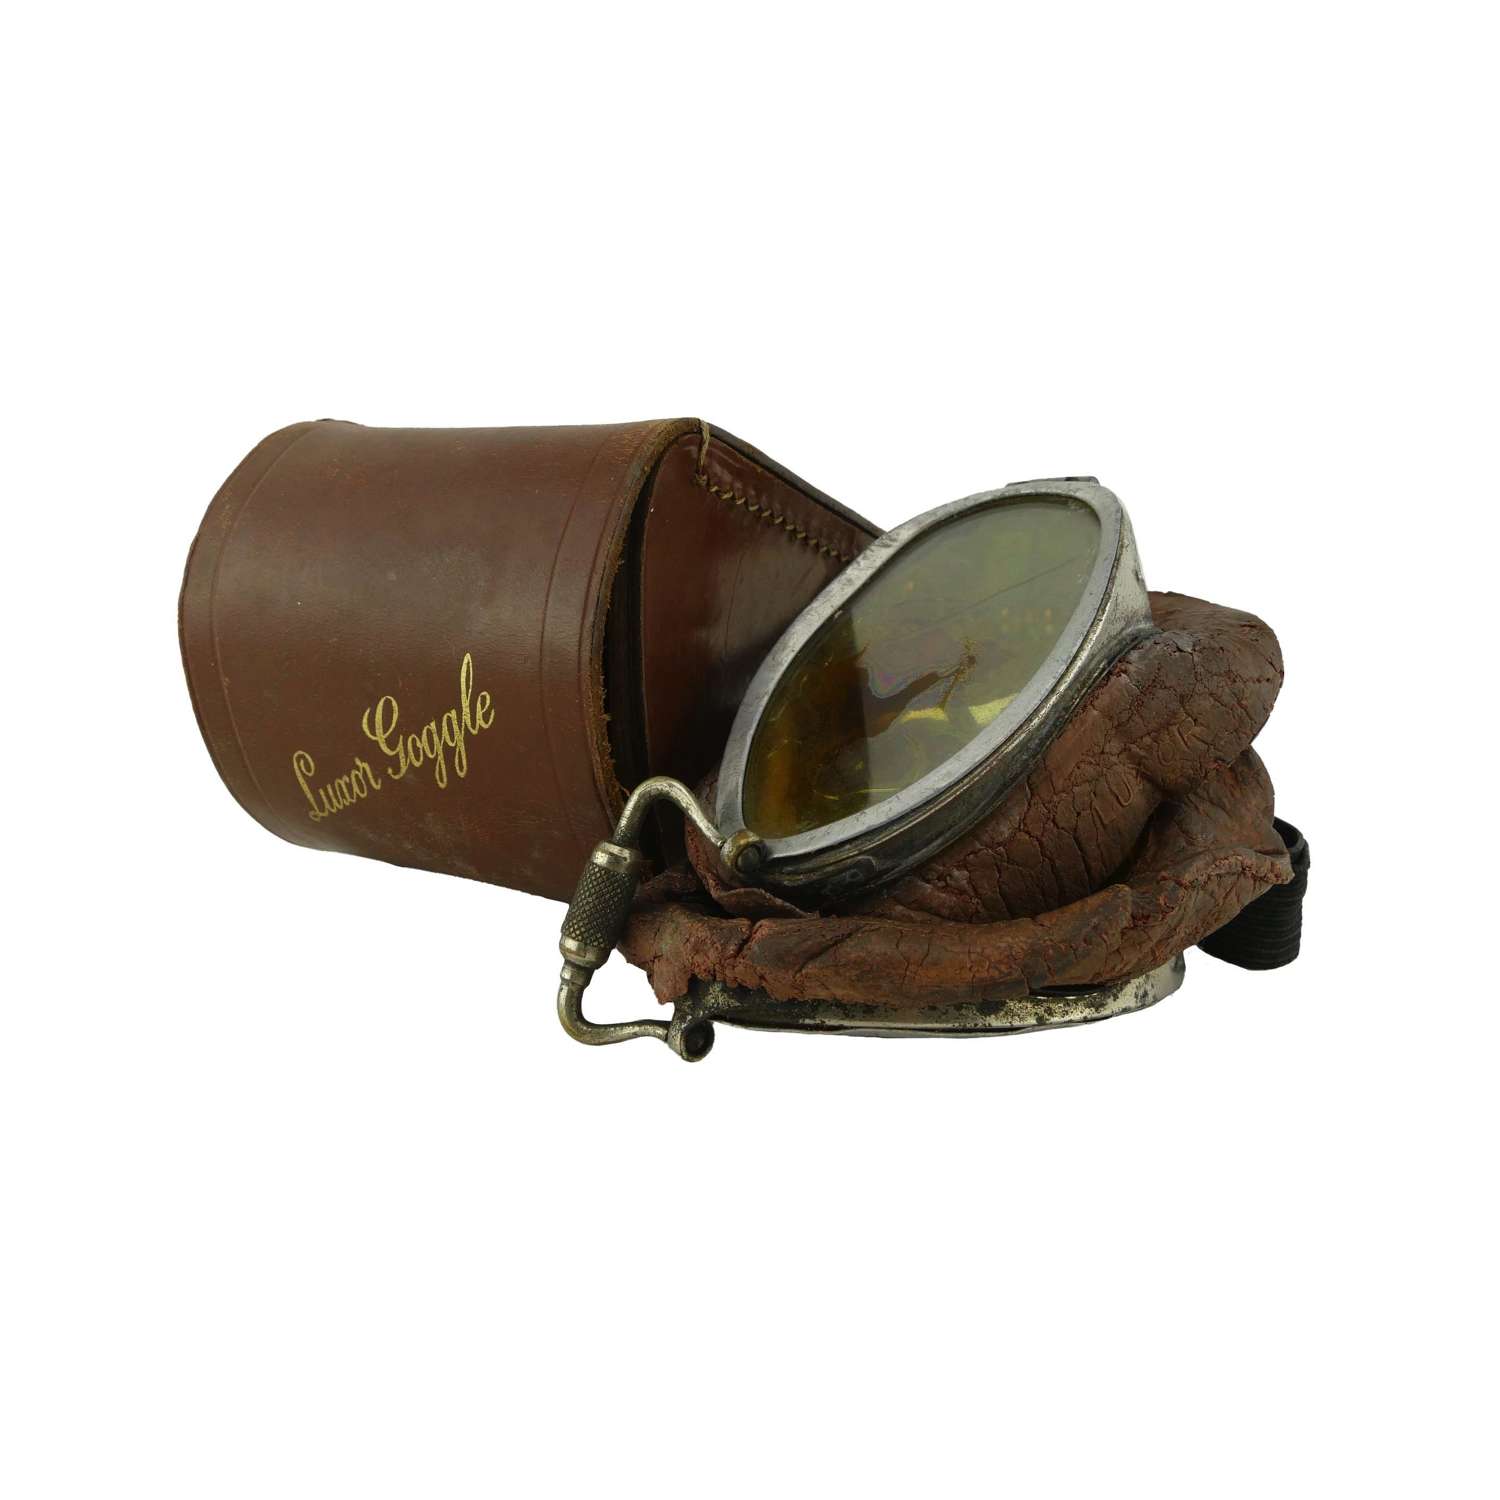 Air Ministry issued Luxor flying goggles, cased